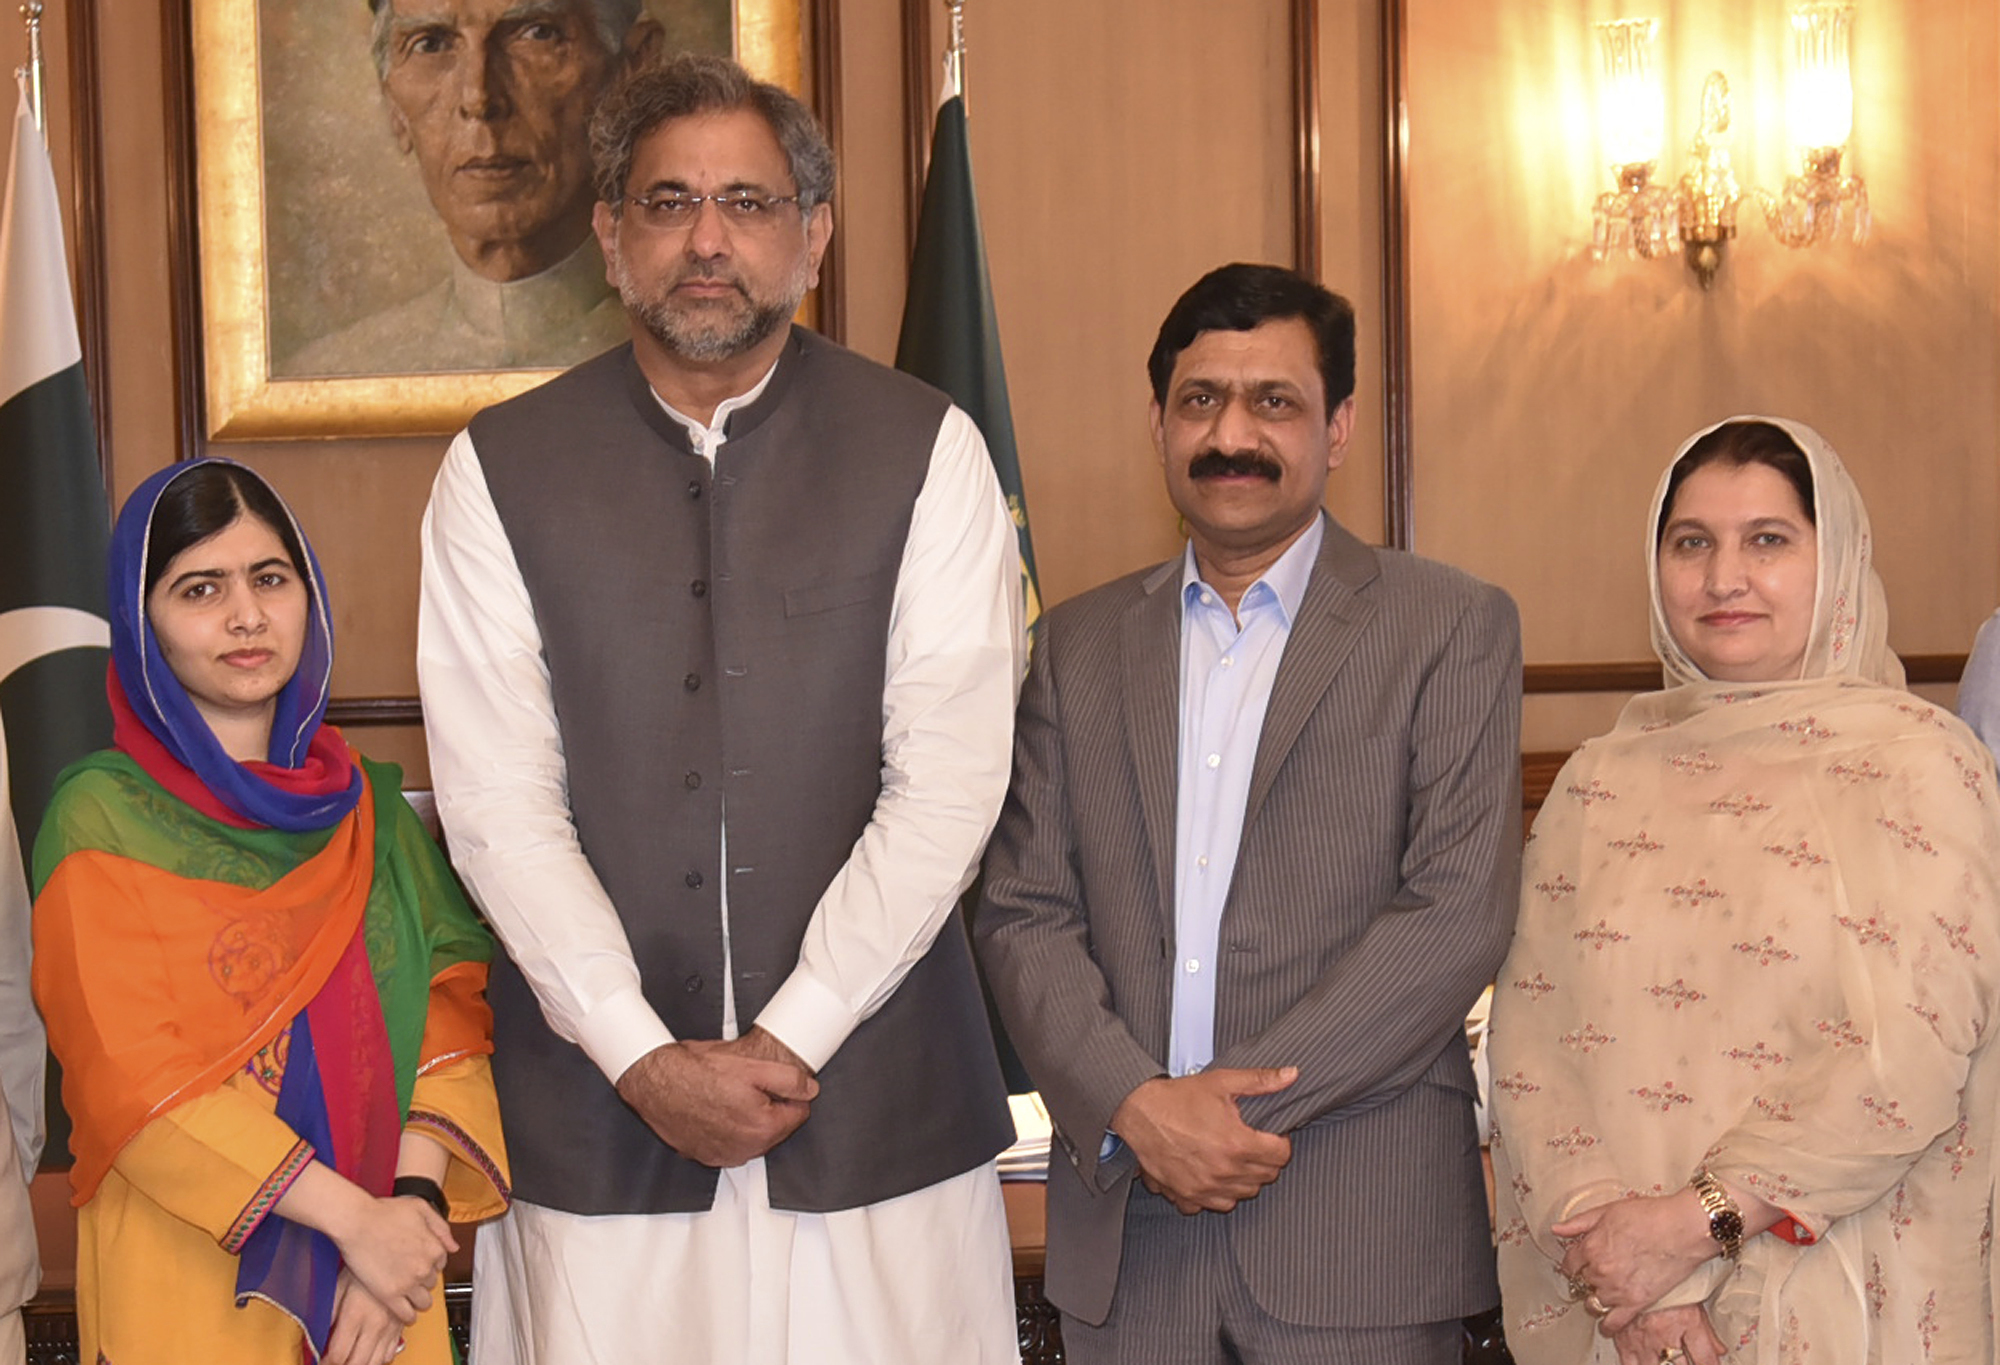 In this photo released by the Press Information Department, Pakistani Nobel Peace Prize winner Malala Yousafzai, left, and her parents pose for a photograph with Shahid Khaqan Abbasi, second from left, Prime Minister of Pakistan in Islamabad, Pakistan, Thursday, March 29, 2018. Yousafzai on Thursday said she was excited to be back in Pakistan for the first time since she was shot in 2012 by Taliban militants angered at her championing of education for girls. (Press Information Department via AP)